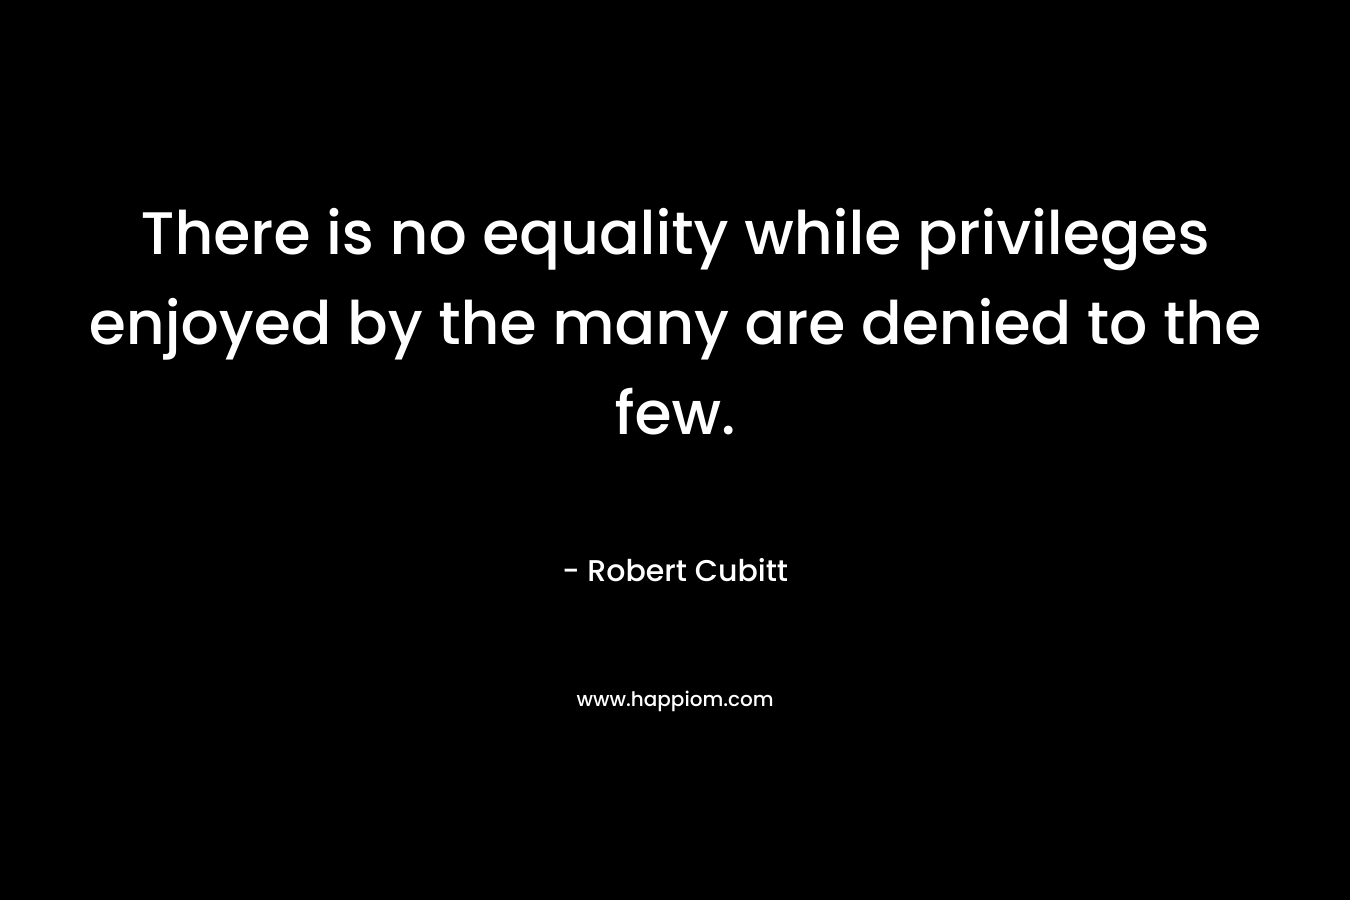 There is no equality while privileges enjoyed by the many are denied to the few. – Robert Cubitt